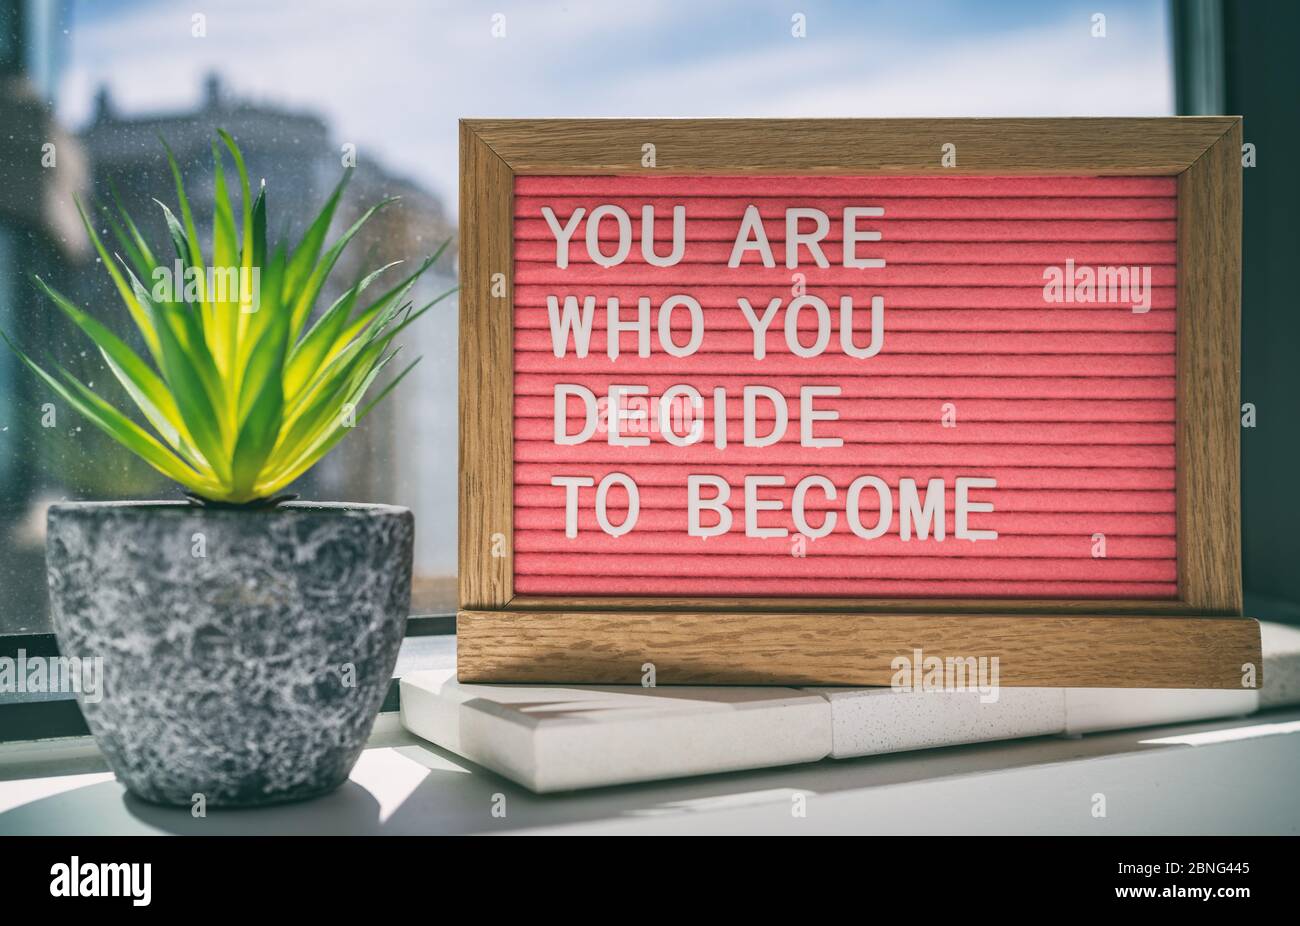 Inspiration quote message sign saying You are who you decide to become - life advice for self esteem, confidence. Home background. Stock Photo